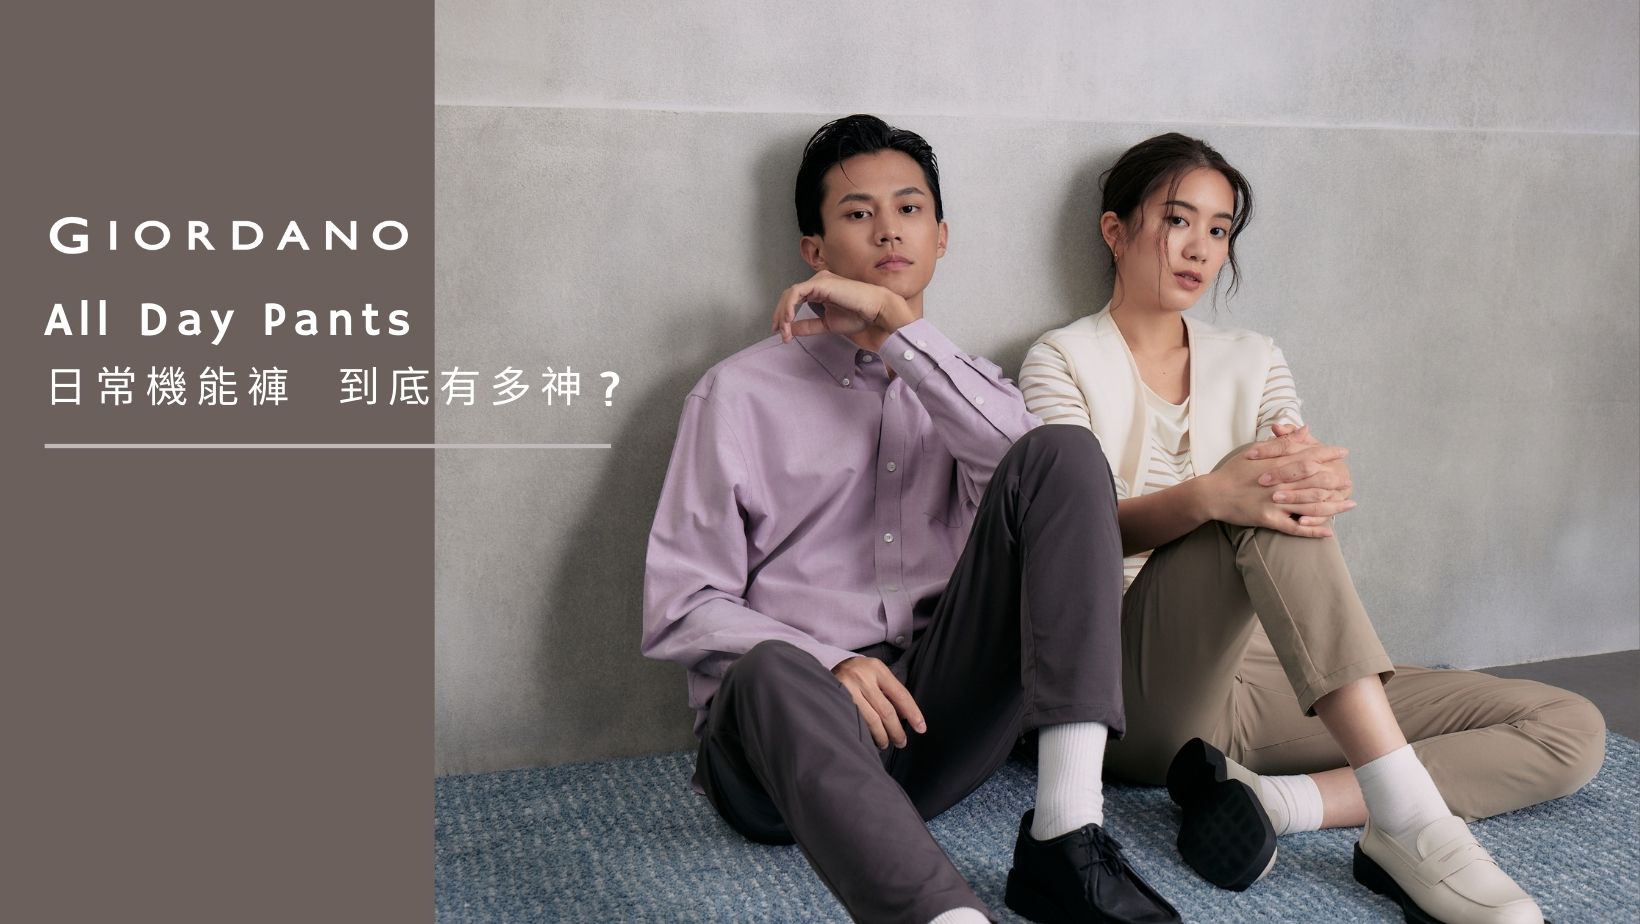 You are currently viewing GIORDANO All Day Pants日常機能褲  到底有多神？